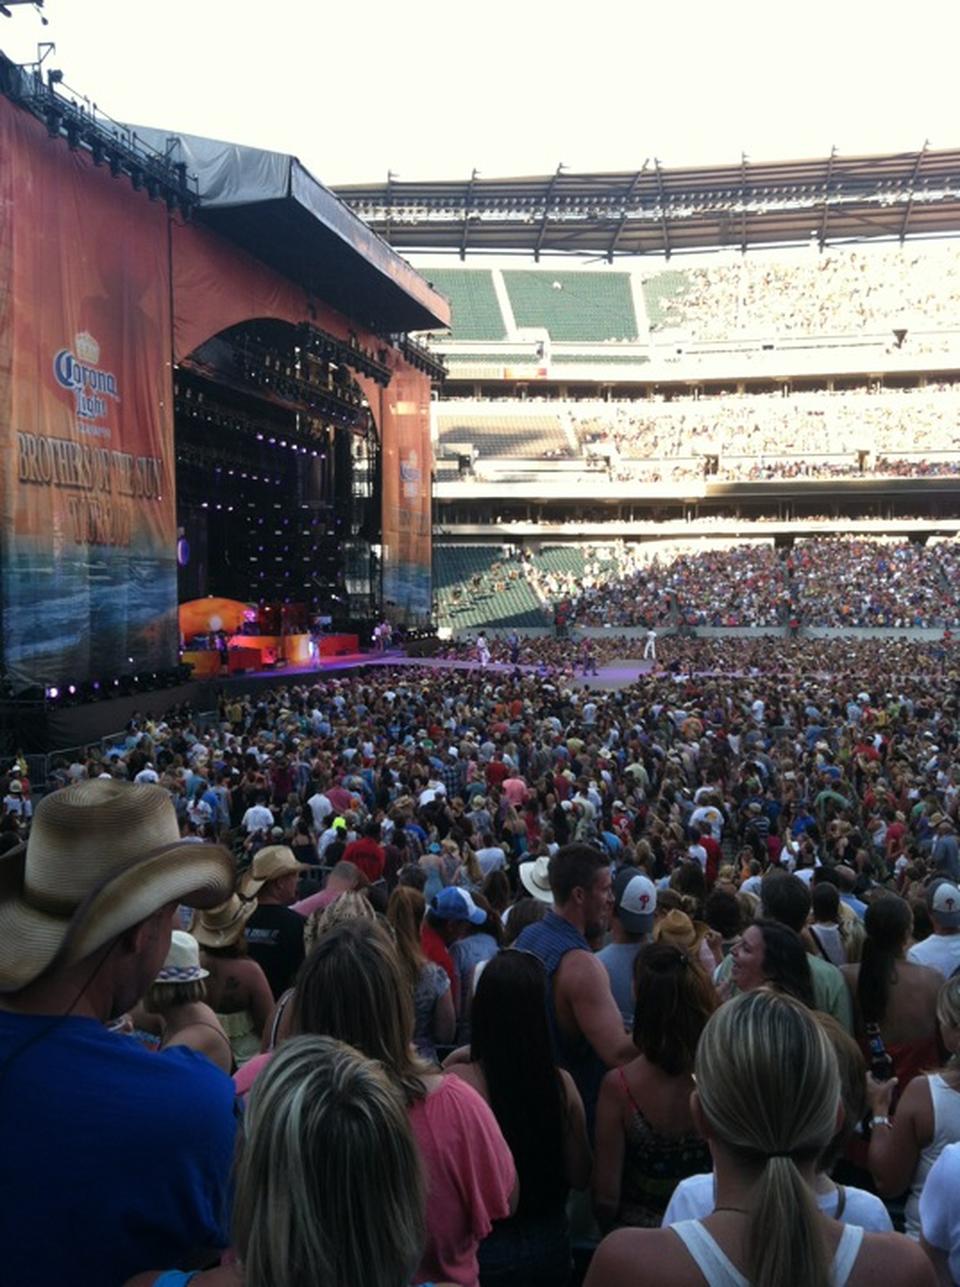 section 138, row 15 seat view  for concert - lincoln financial field